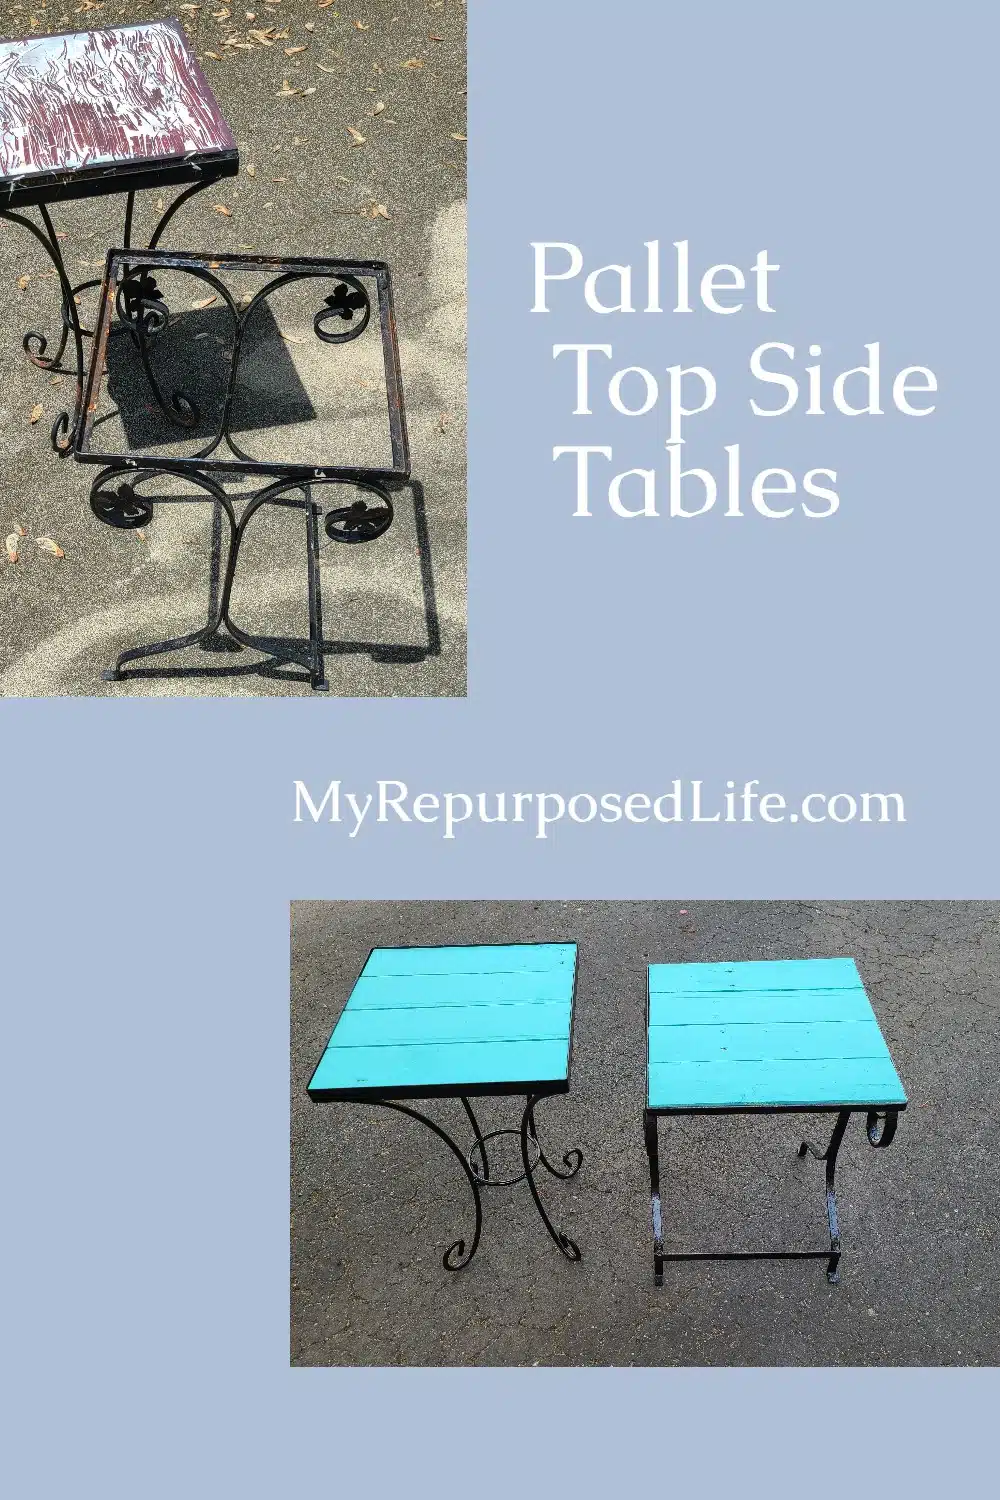 Pallet Top Side Tables for Outdoors is a complete tutorial on how to repurpose a metal side table by adding a new pallet table top. Do It Yourself! #MyRepurposedLife #repurposed #pallet #tables #outdoors #DIY via @repurposedlife